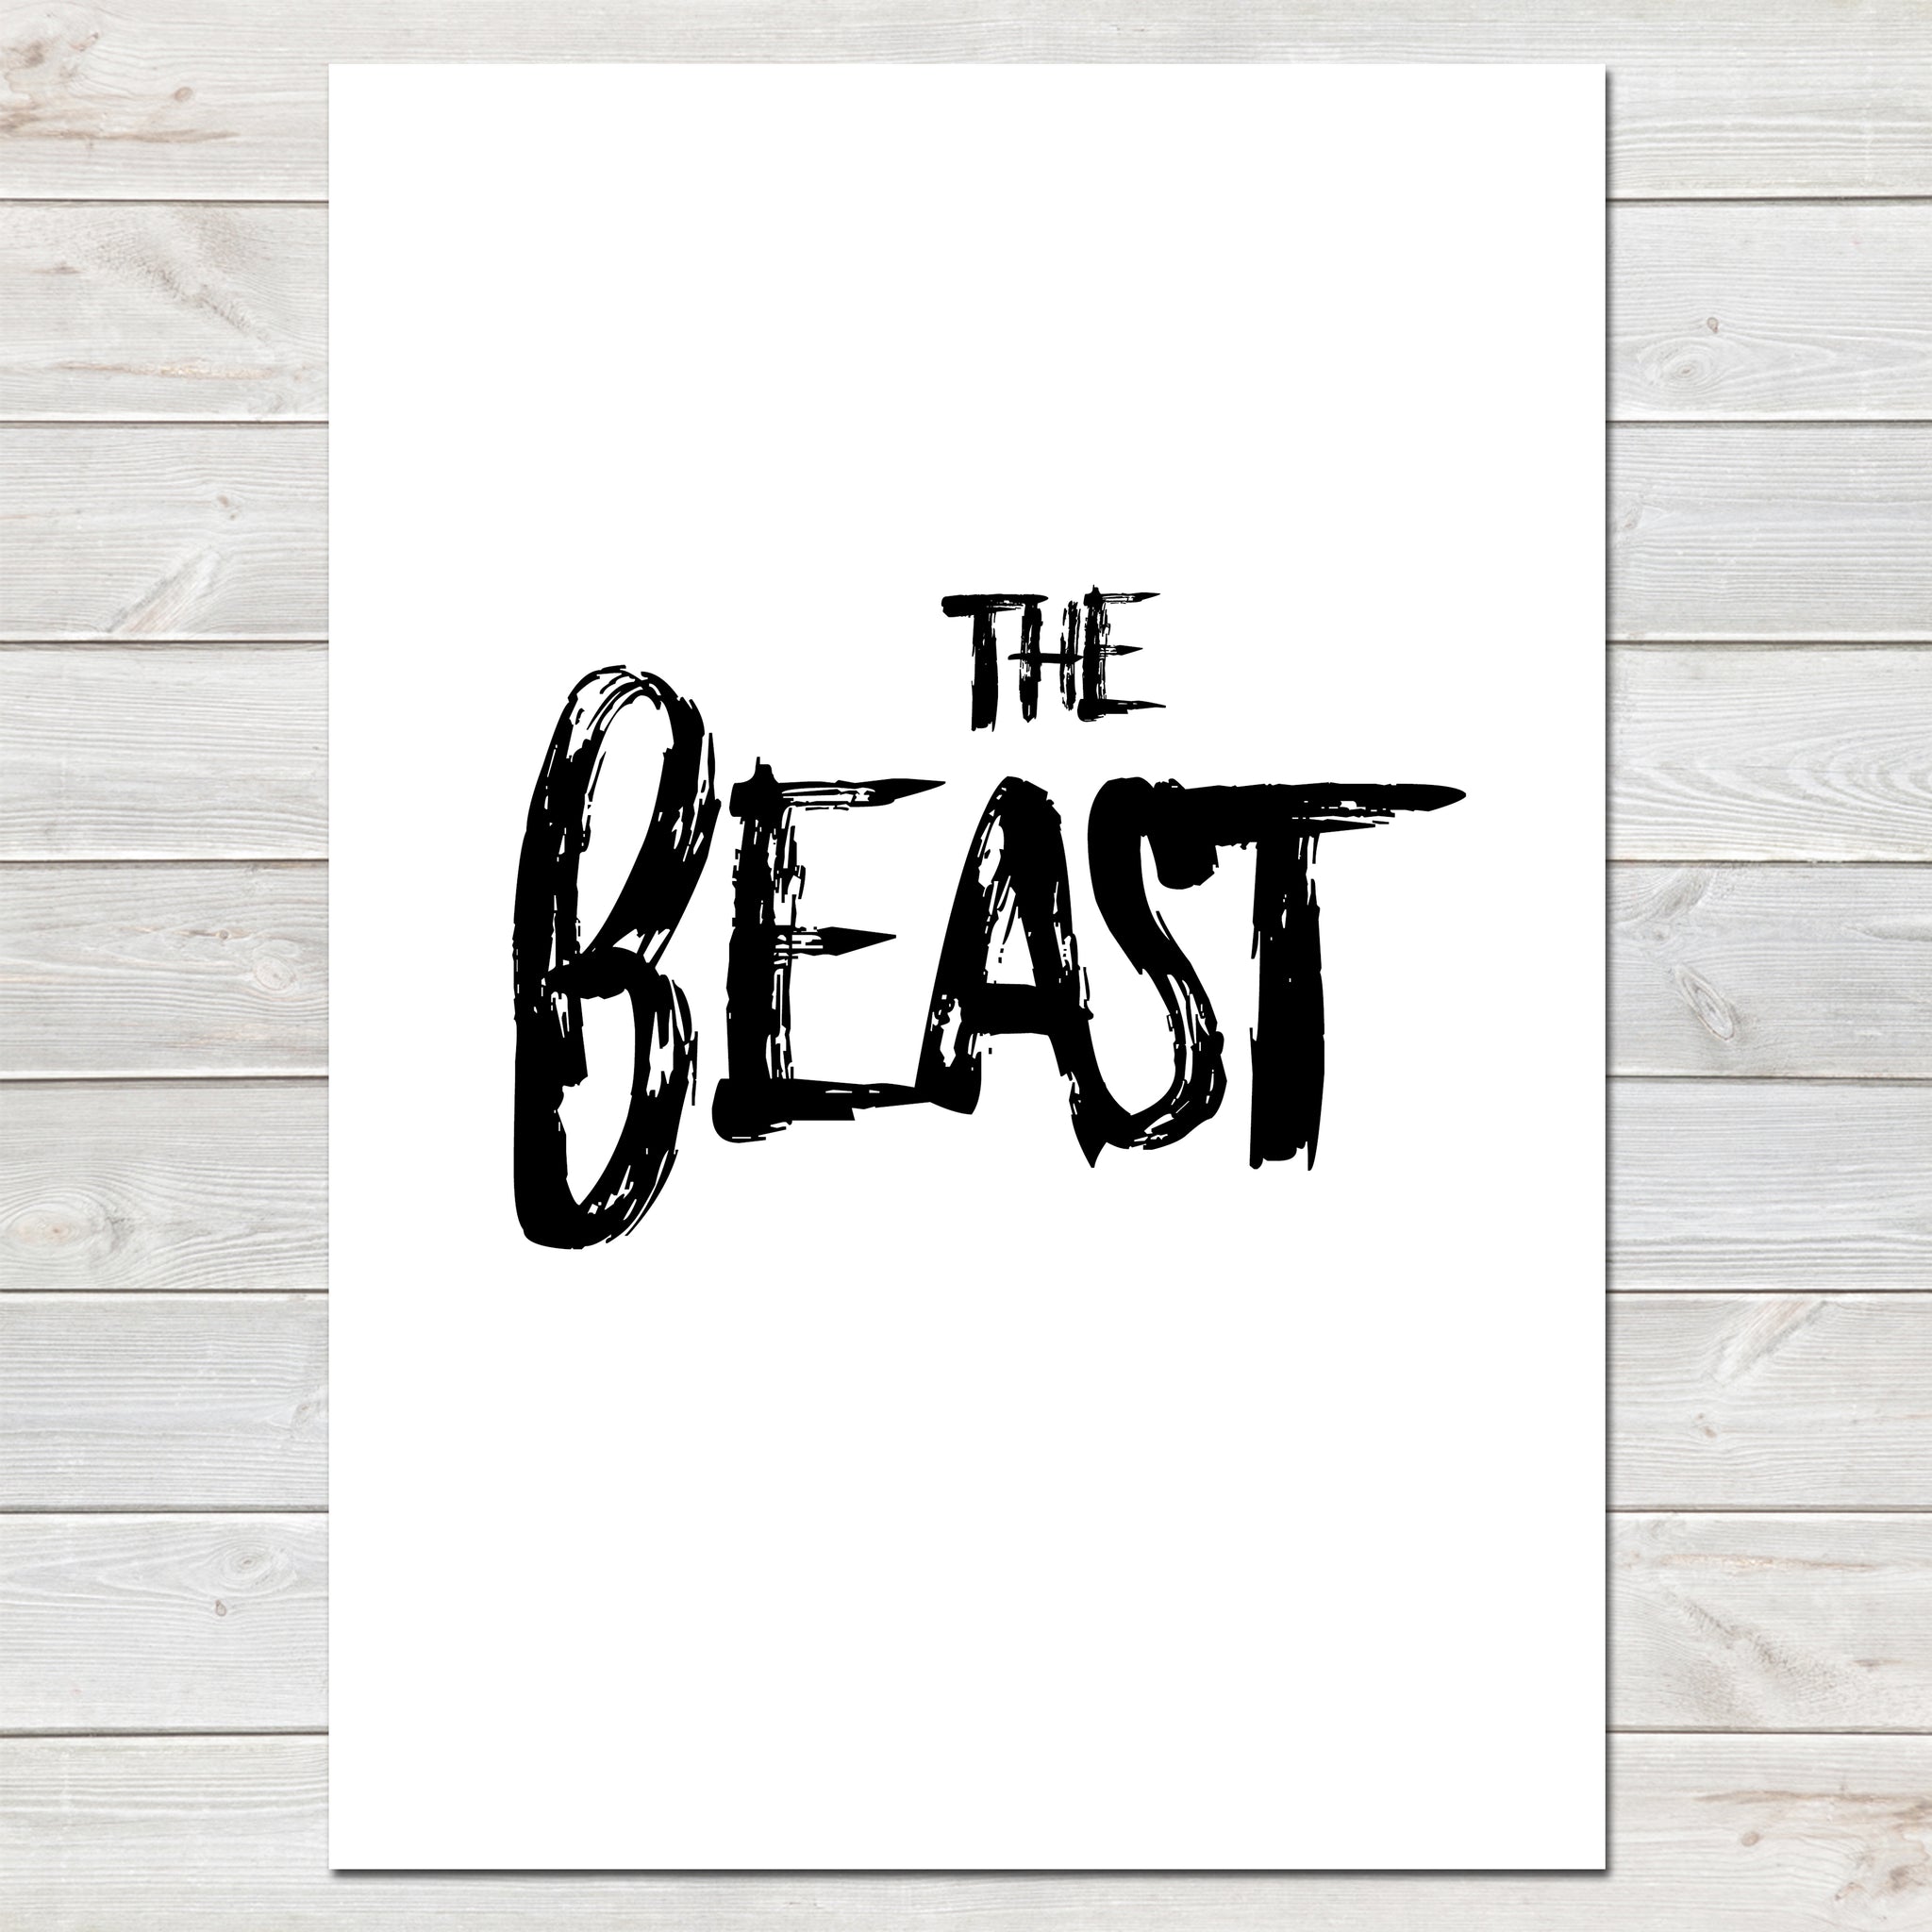 The Beast Valentines New Home Wall Decor / Gift / Love Print